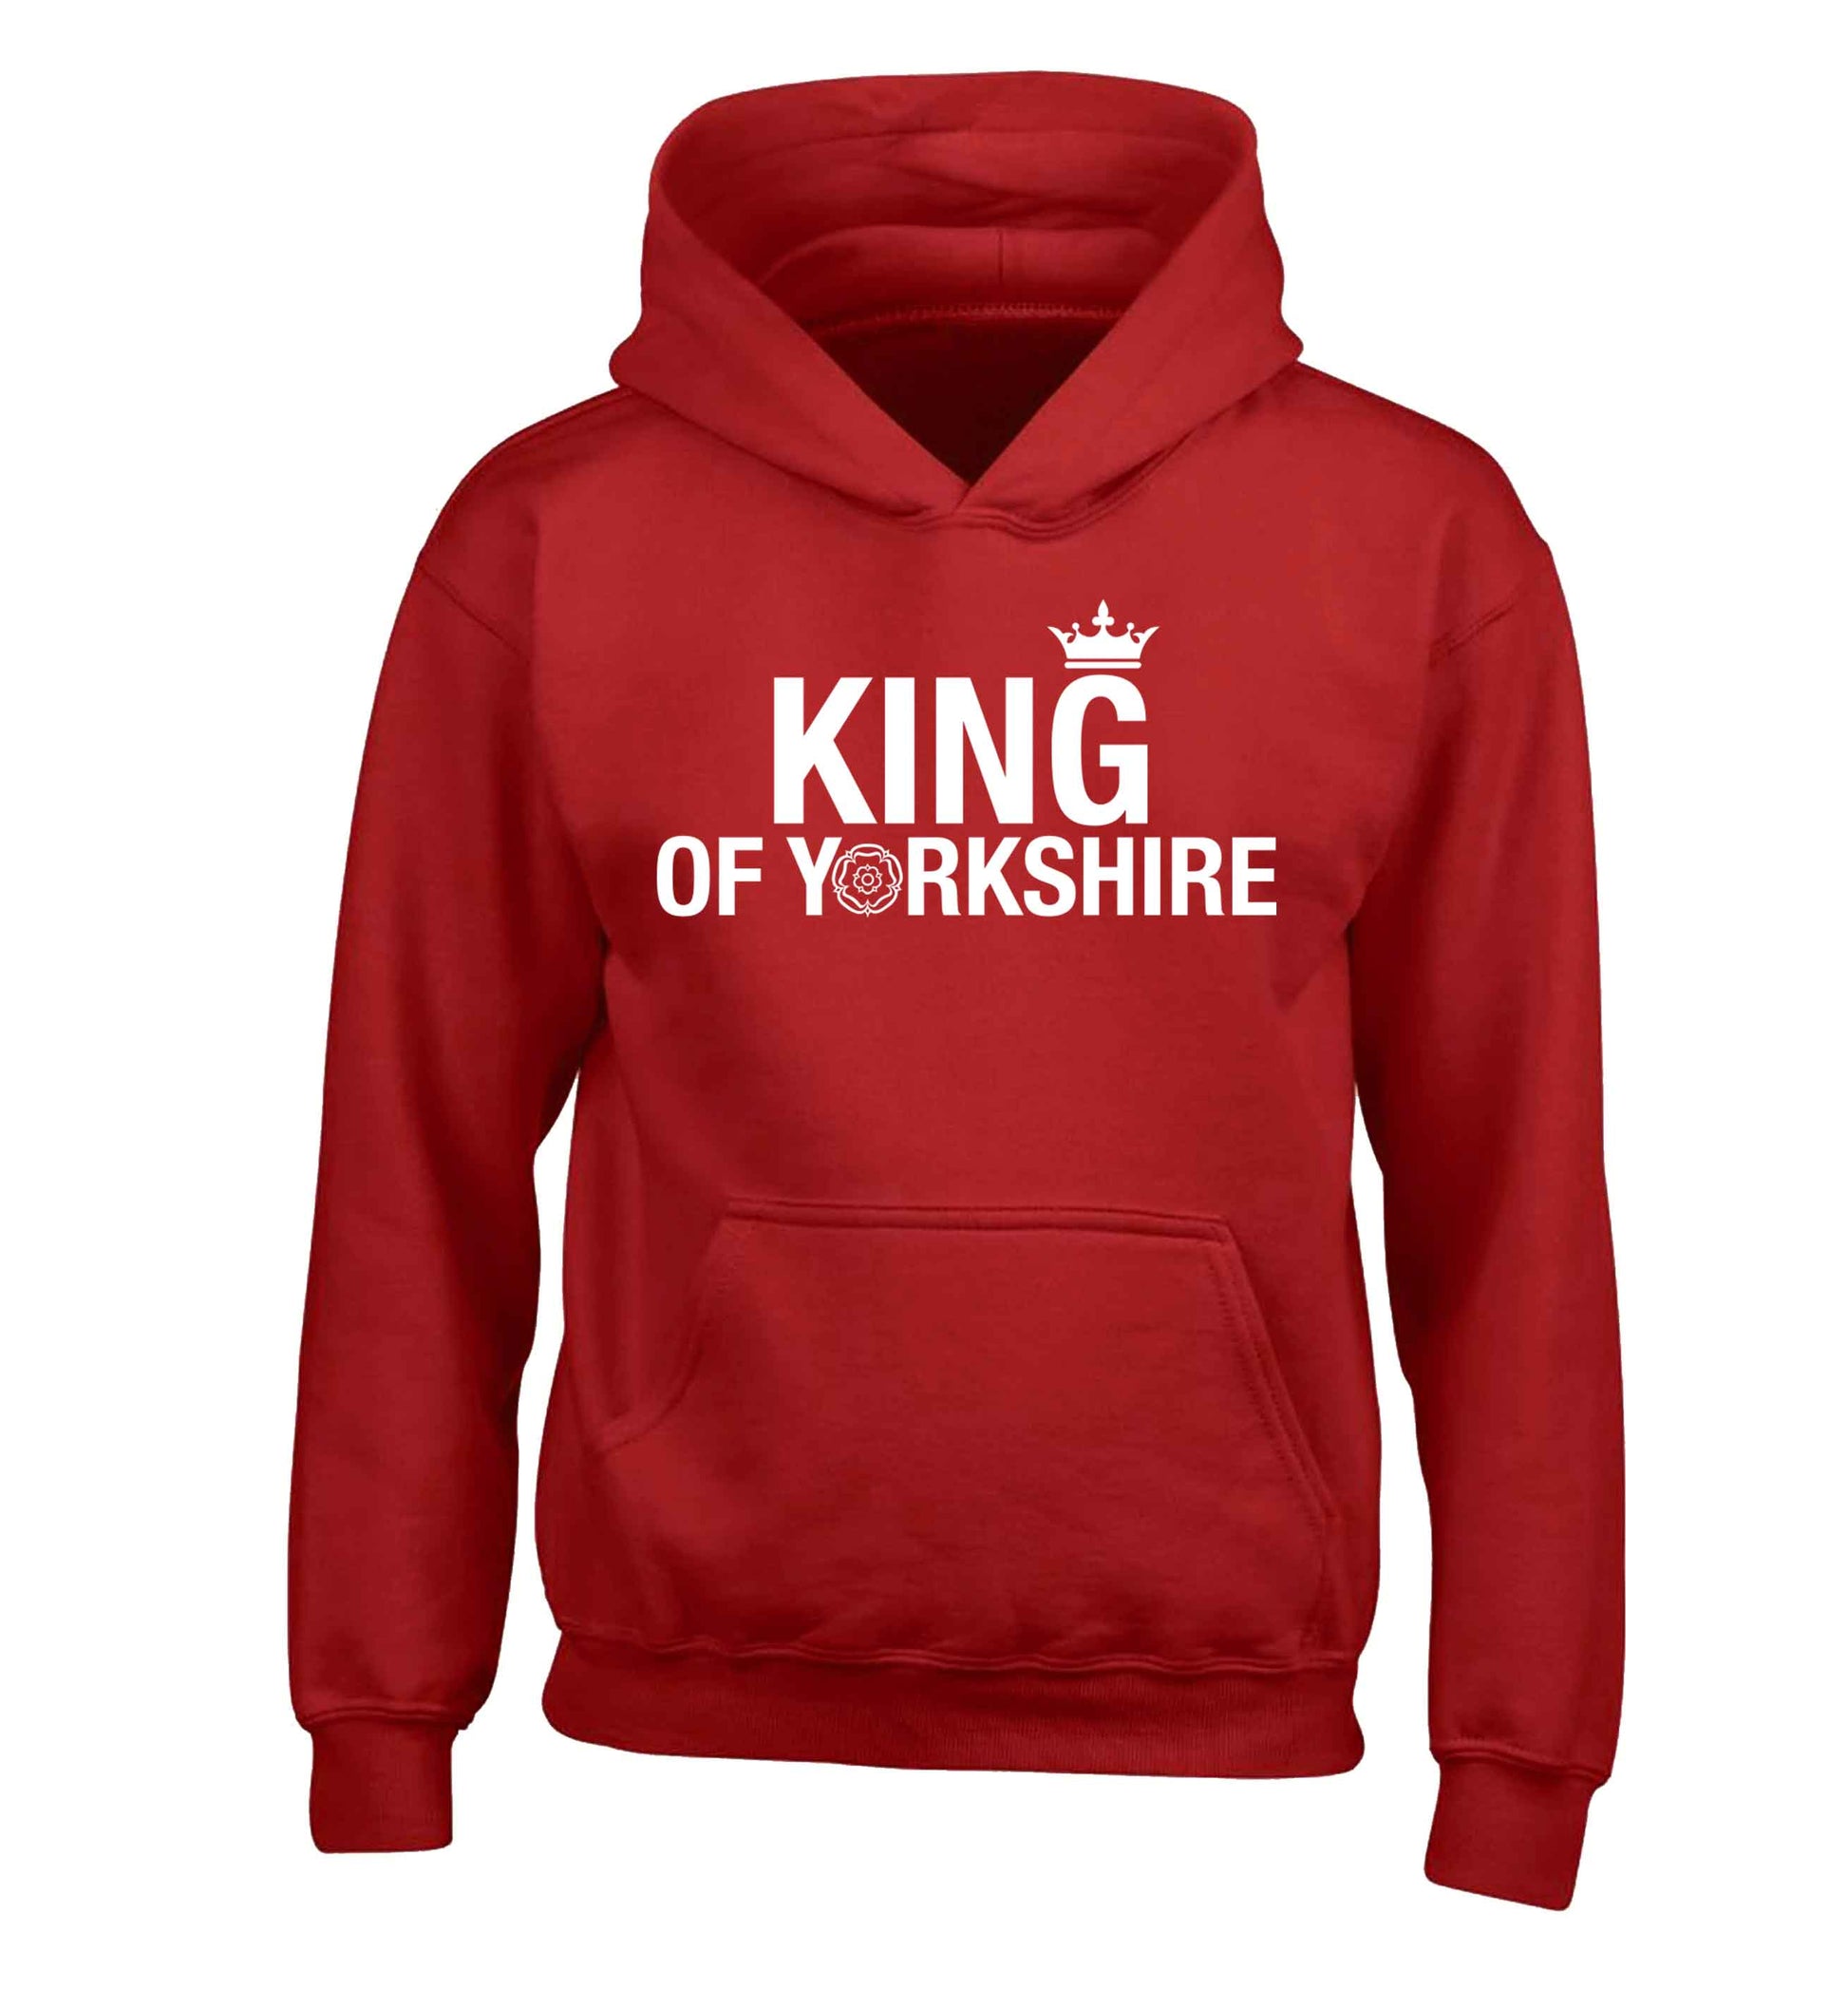 King of Yorkshire children's red hoodie 12-13 Years